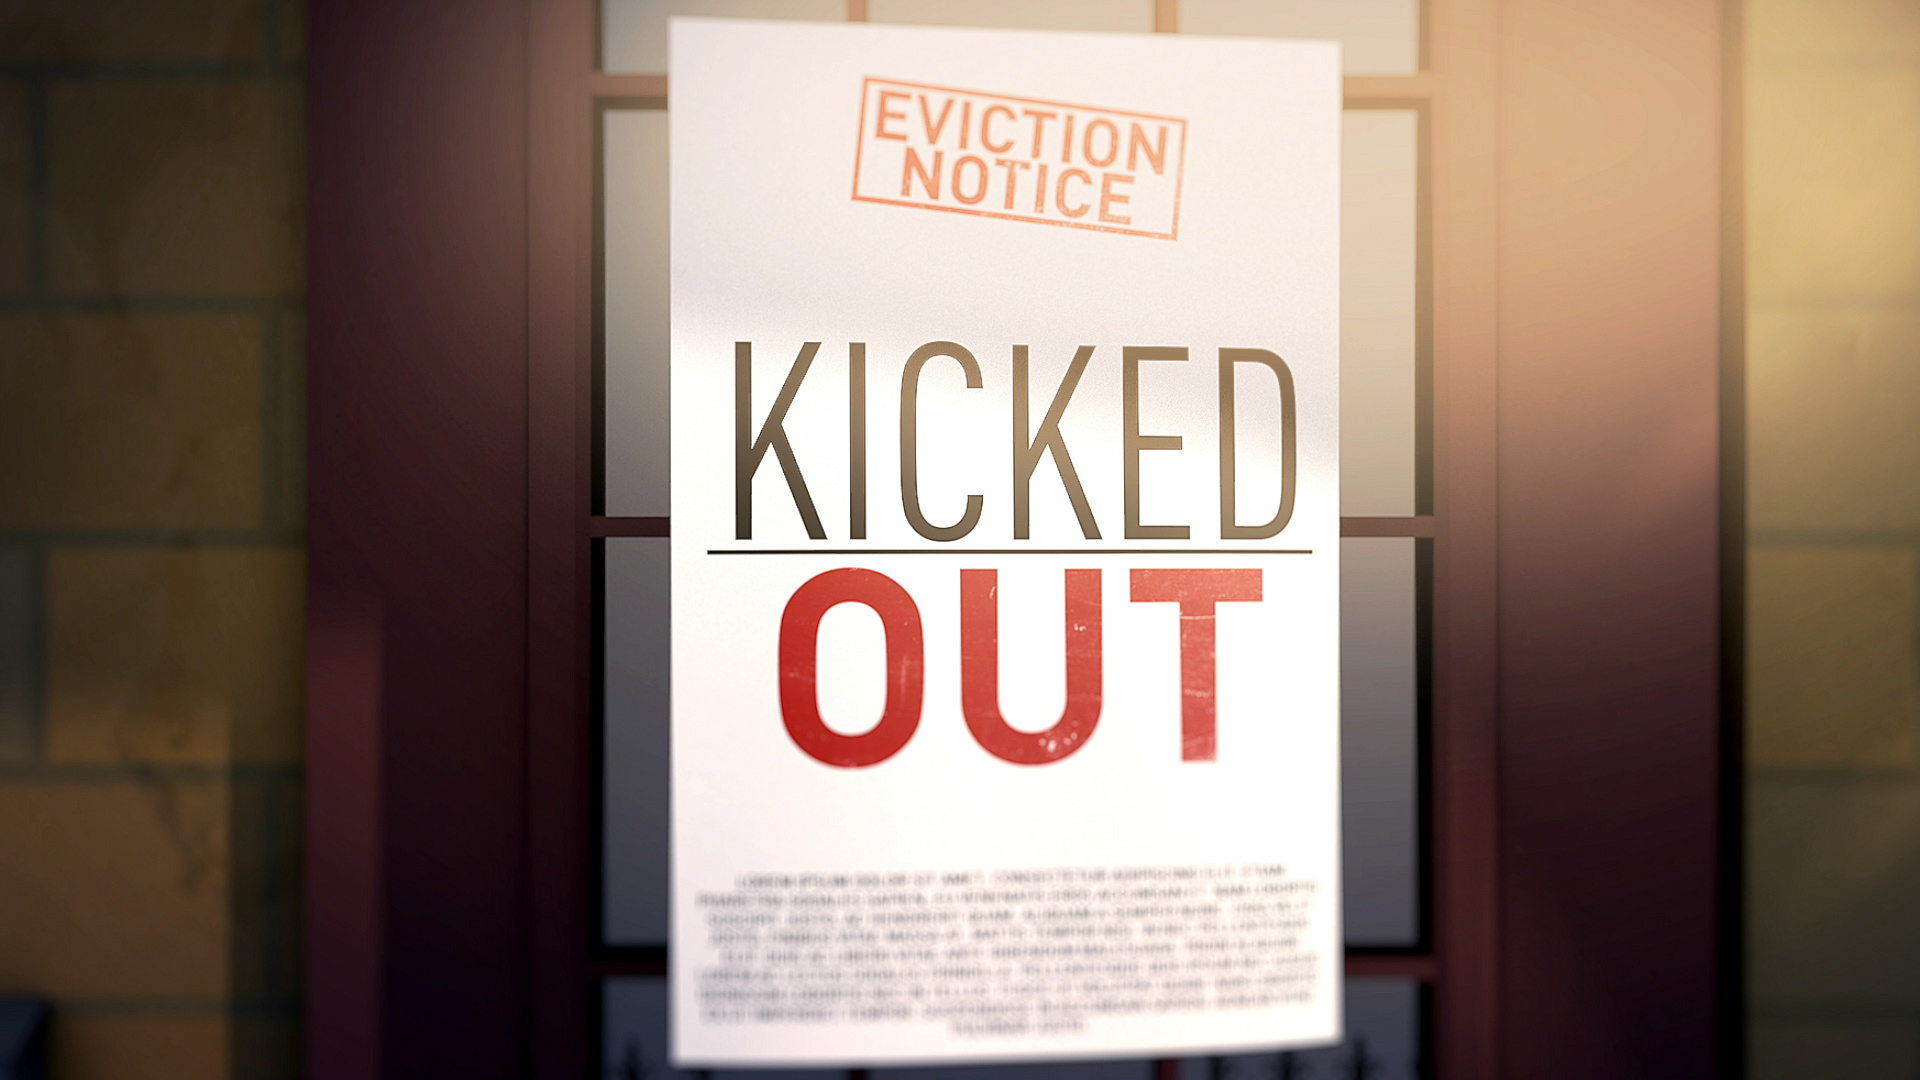 NBC Bay Area's 10-part investigative series "Kicked Out" revealed how hundreds of San Francisco residents were wrongfully evicted